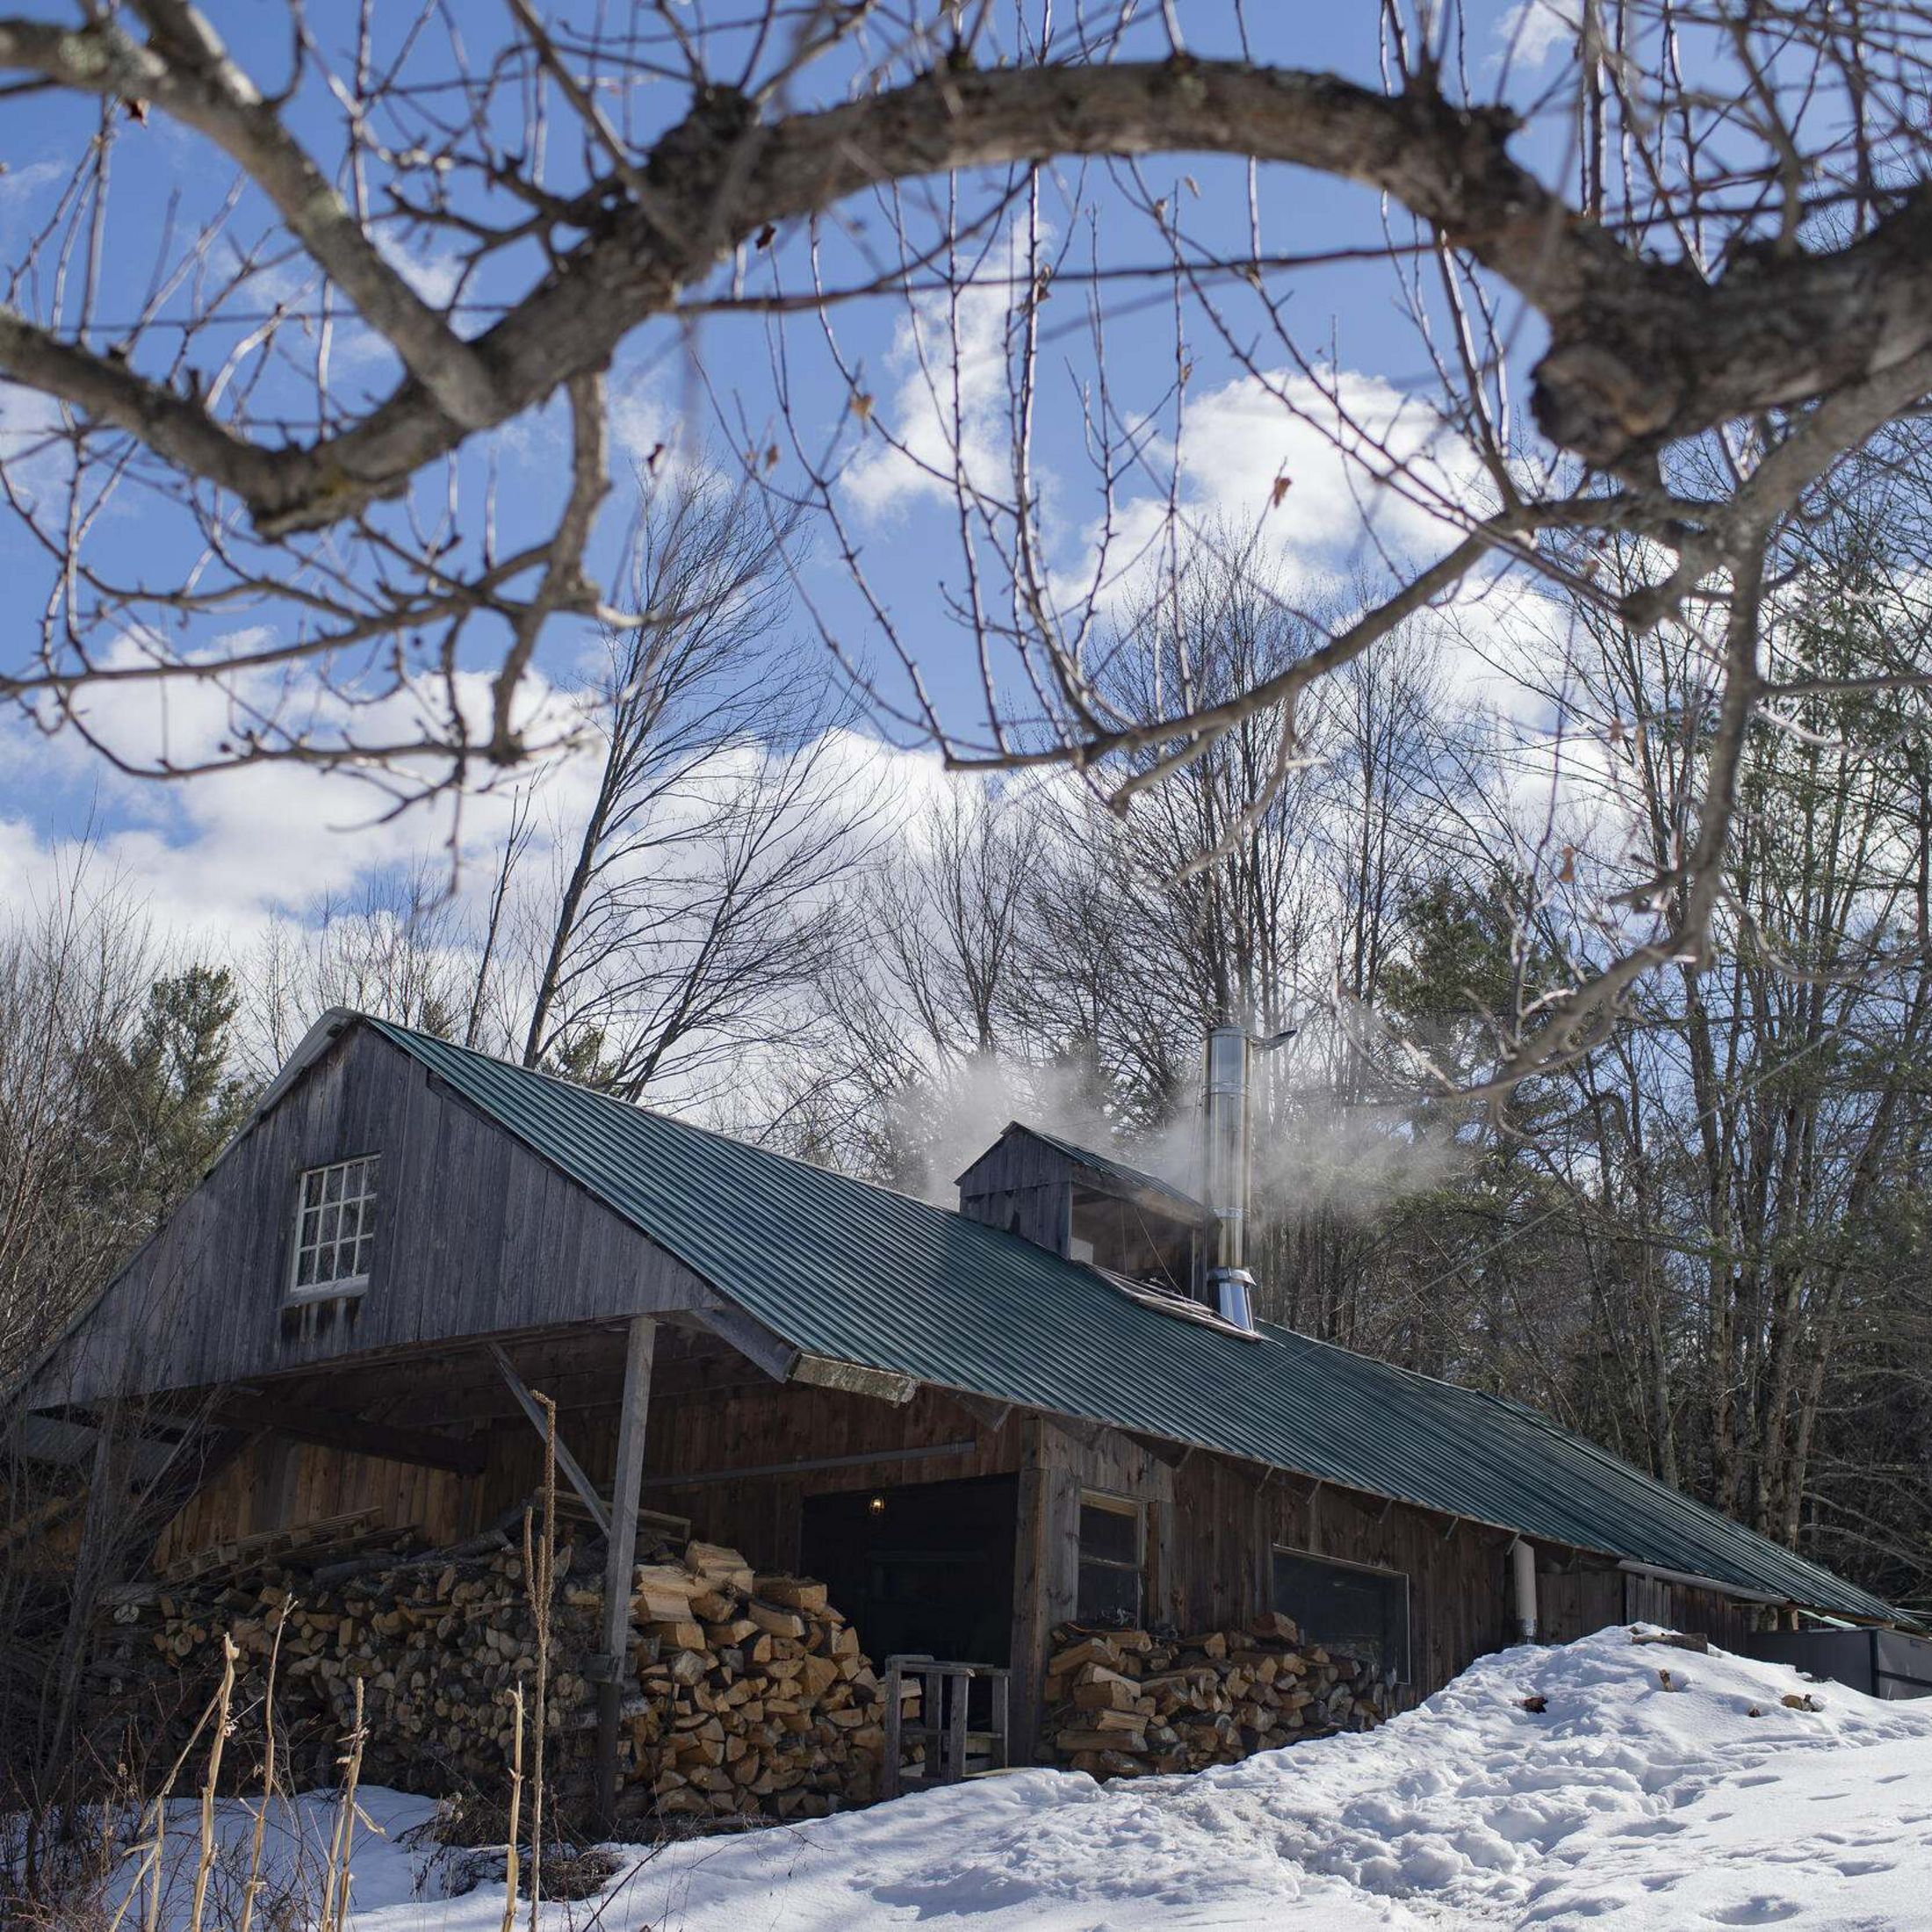 Cain in the winter with smoke coming out, snow on the ground, and wooden logs in the front. 